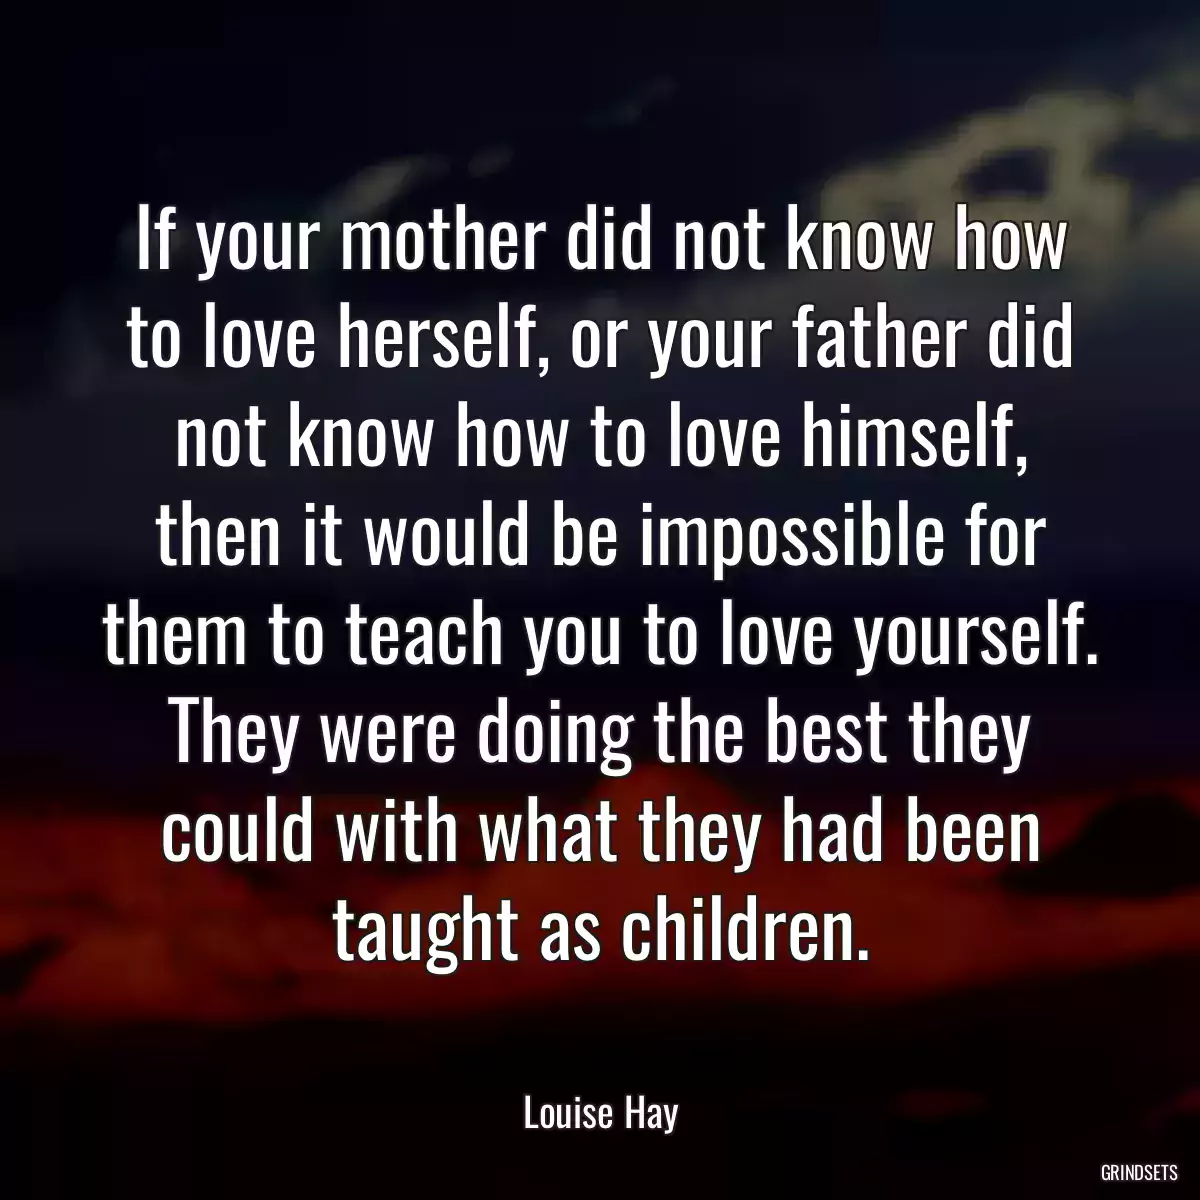 If your mother did not know how to love herself, or your father did not know how to love himself, then it would be impossible for them to teach you to love yourself. They were doing the best they could with what they had been taught as children.